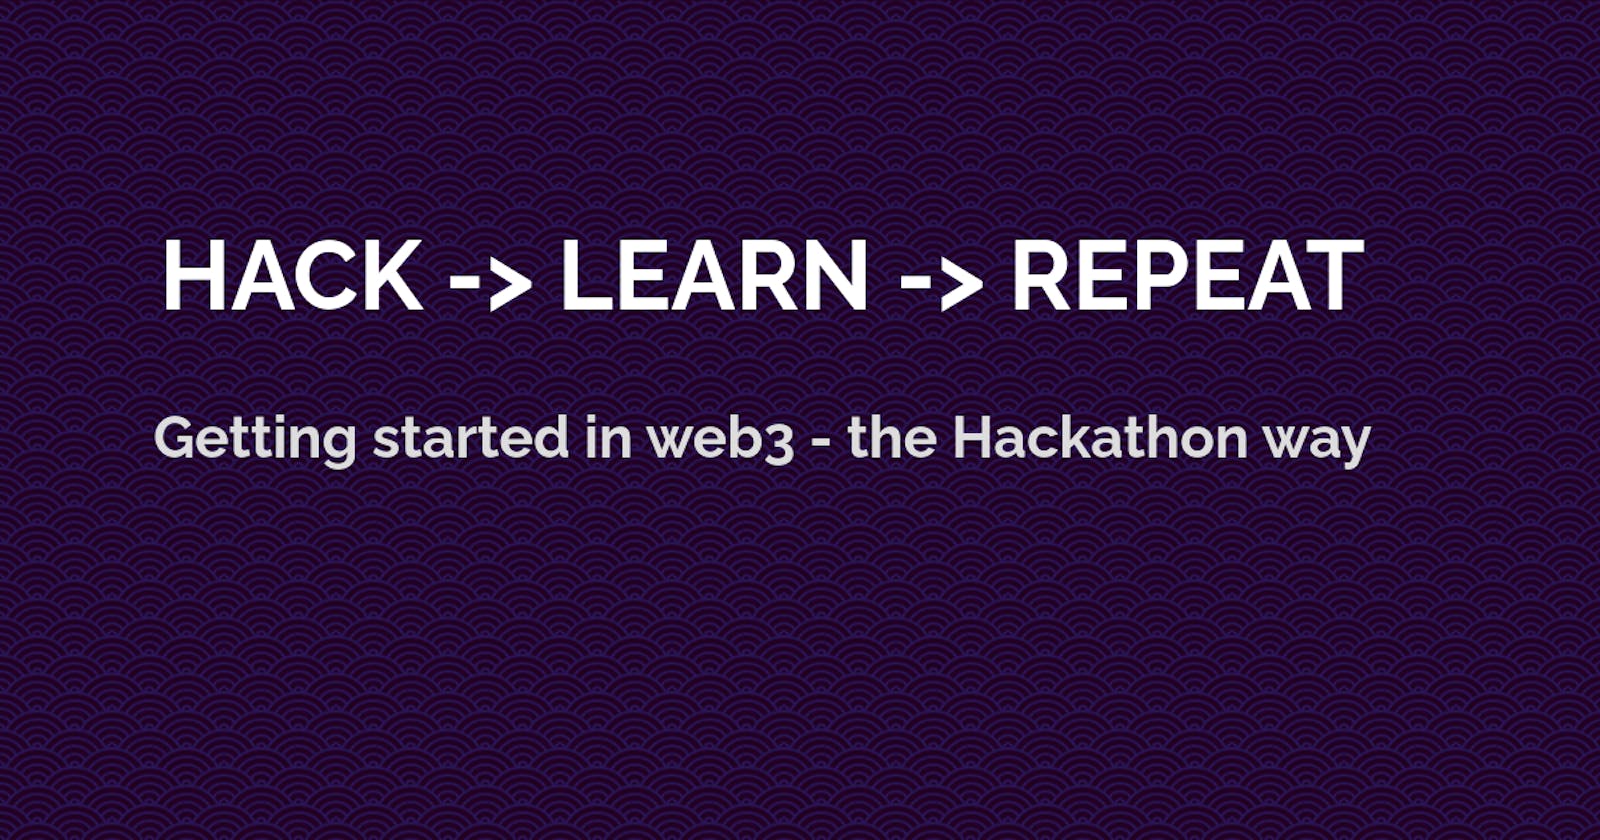 Getting started in web3 through Hackathons 👀